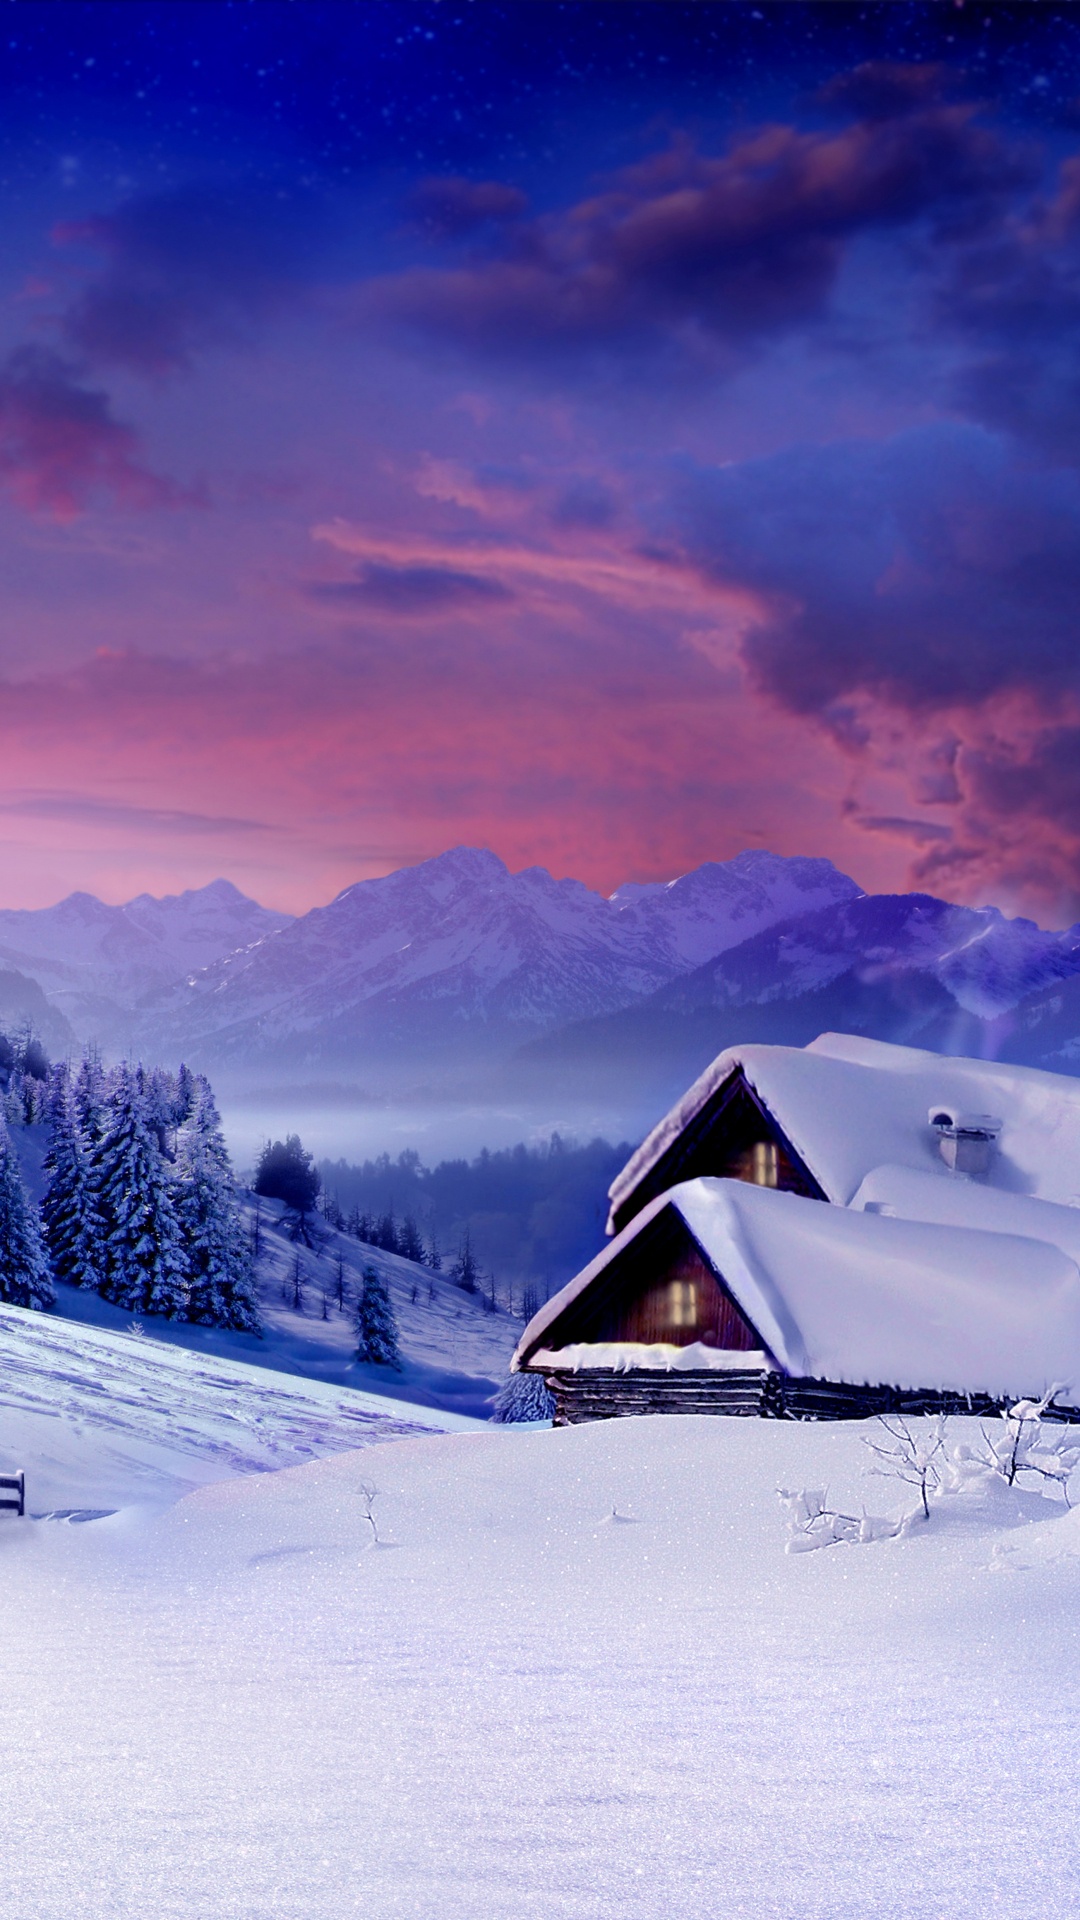 Brown Wooden House on Snow Covered Ground Near Trees and Mountains During Daytime. Wallpaper in 1080x1920 Resolution